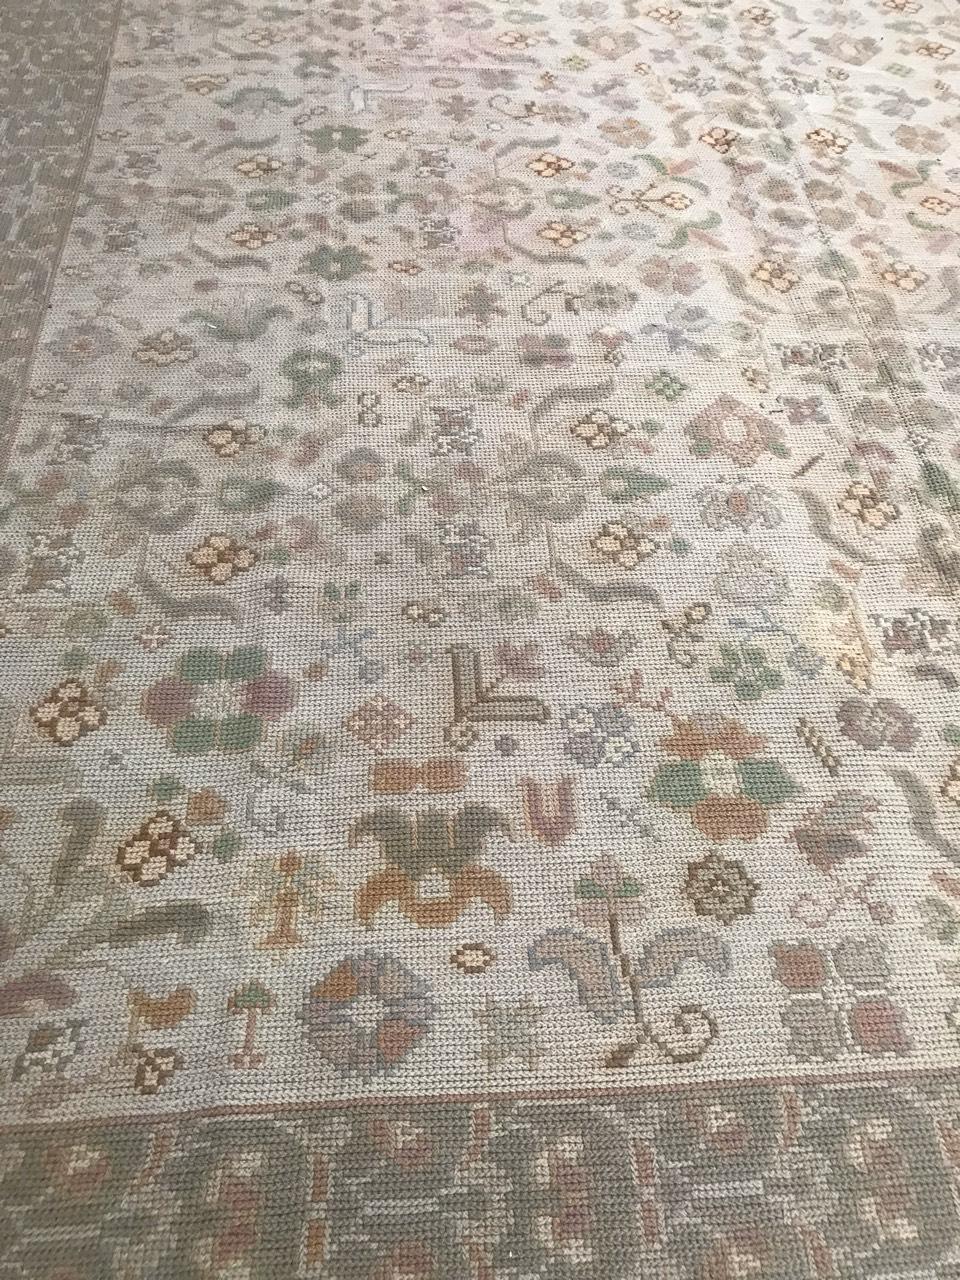 Beautiful antique Portuguese rug from Arraiolos, with a decorative design and light colors with beige and green, entirely hand embroidered with Portuguese needlepoint method, with wool on jute foundation.